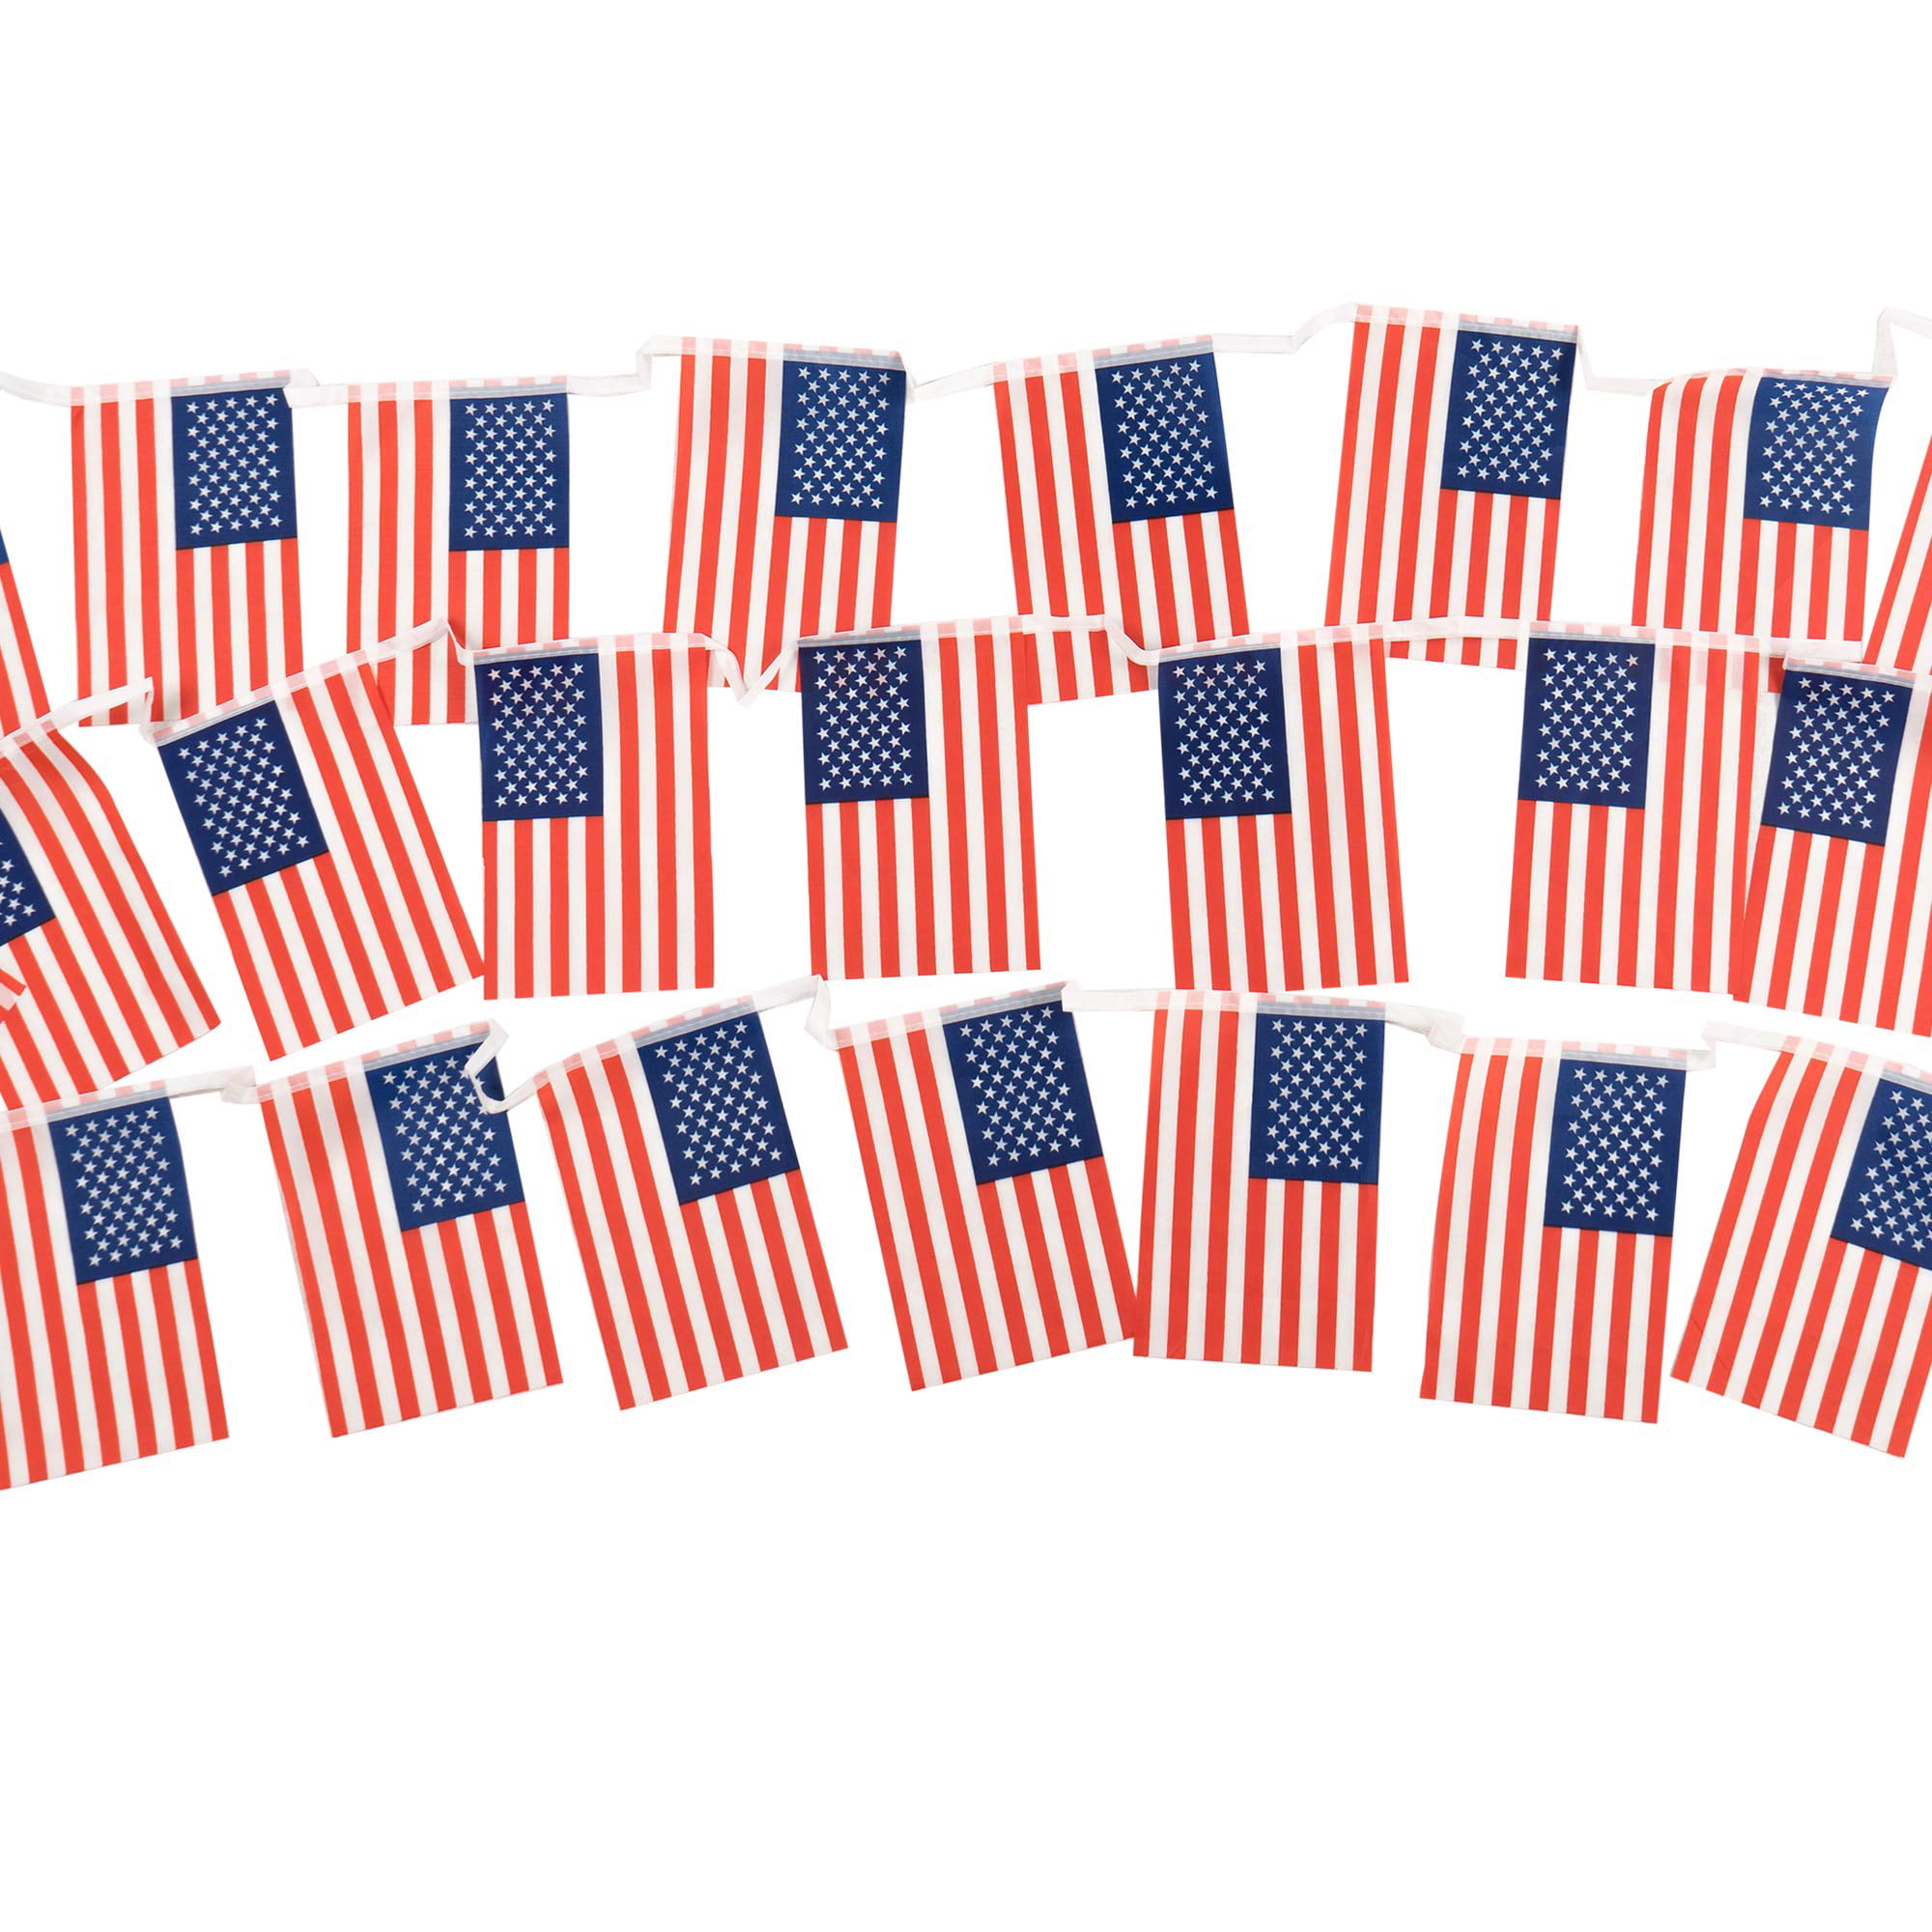 Details about   3x6 Ft USA Pleated Fan Bunting Flag Embroidered Stars Sewn Stripes Brass Grommet 